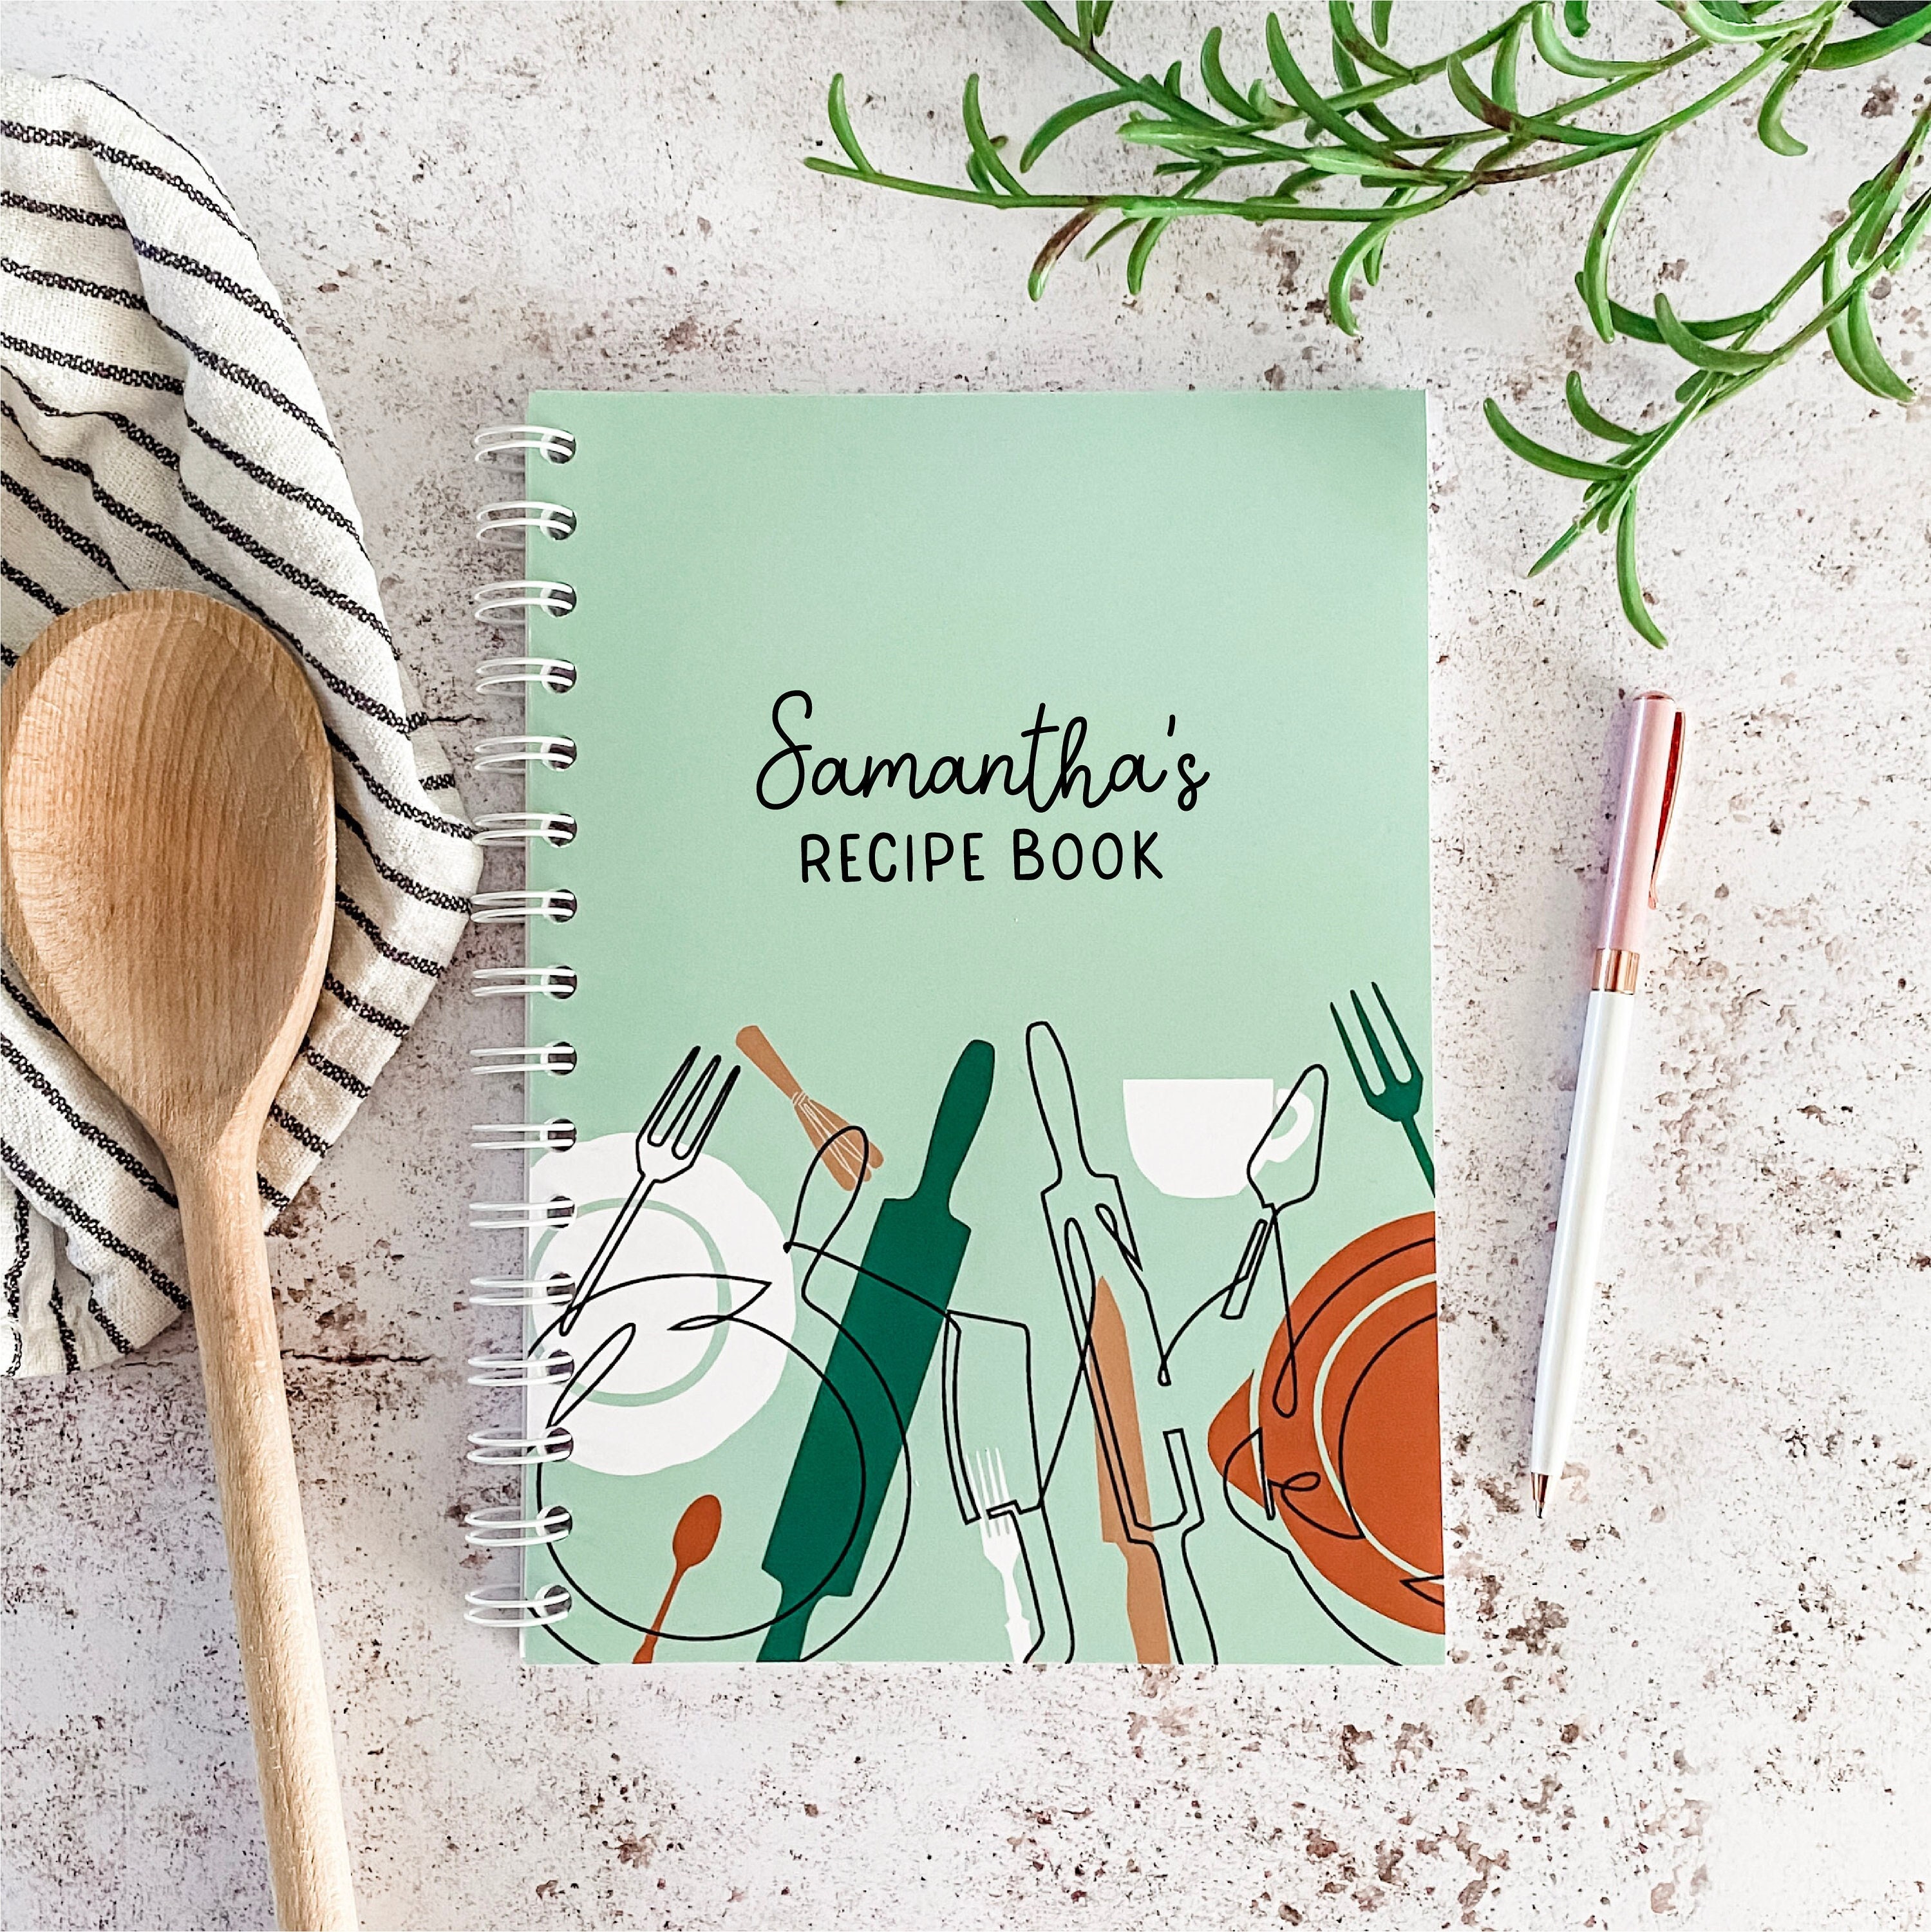 Recipes: Blank Recipe Book to Create Your Own Delicious Recipes | Do-It-Yourself Cookbook | Empty Cookbook to Write in Your 120 Favorite Recipes